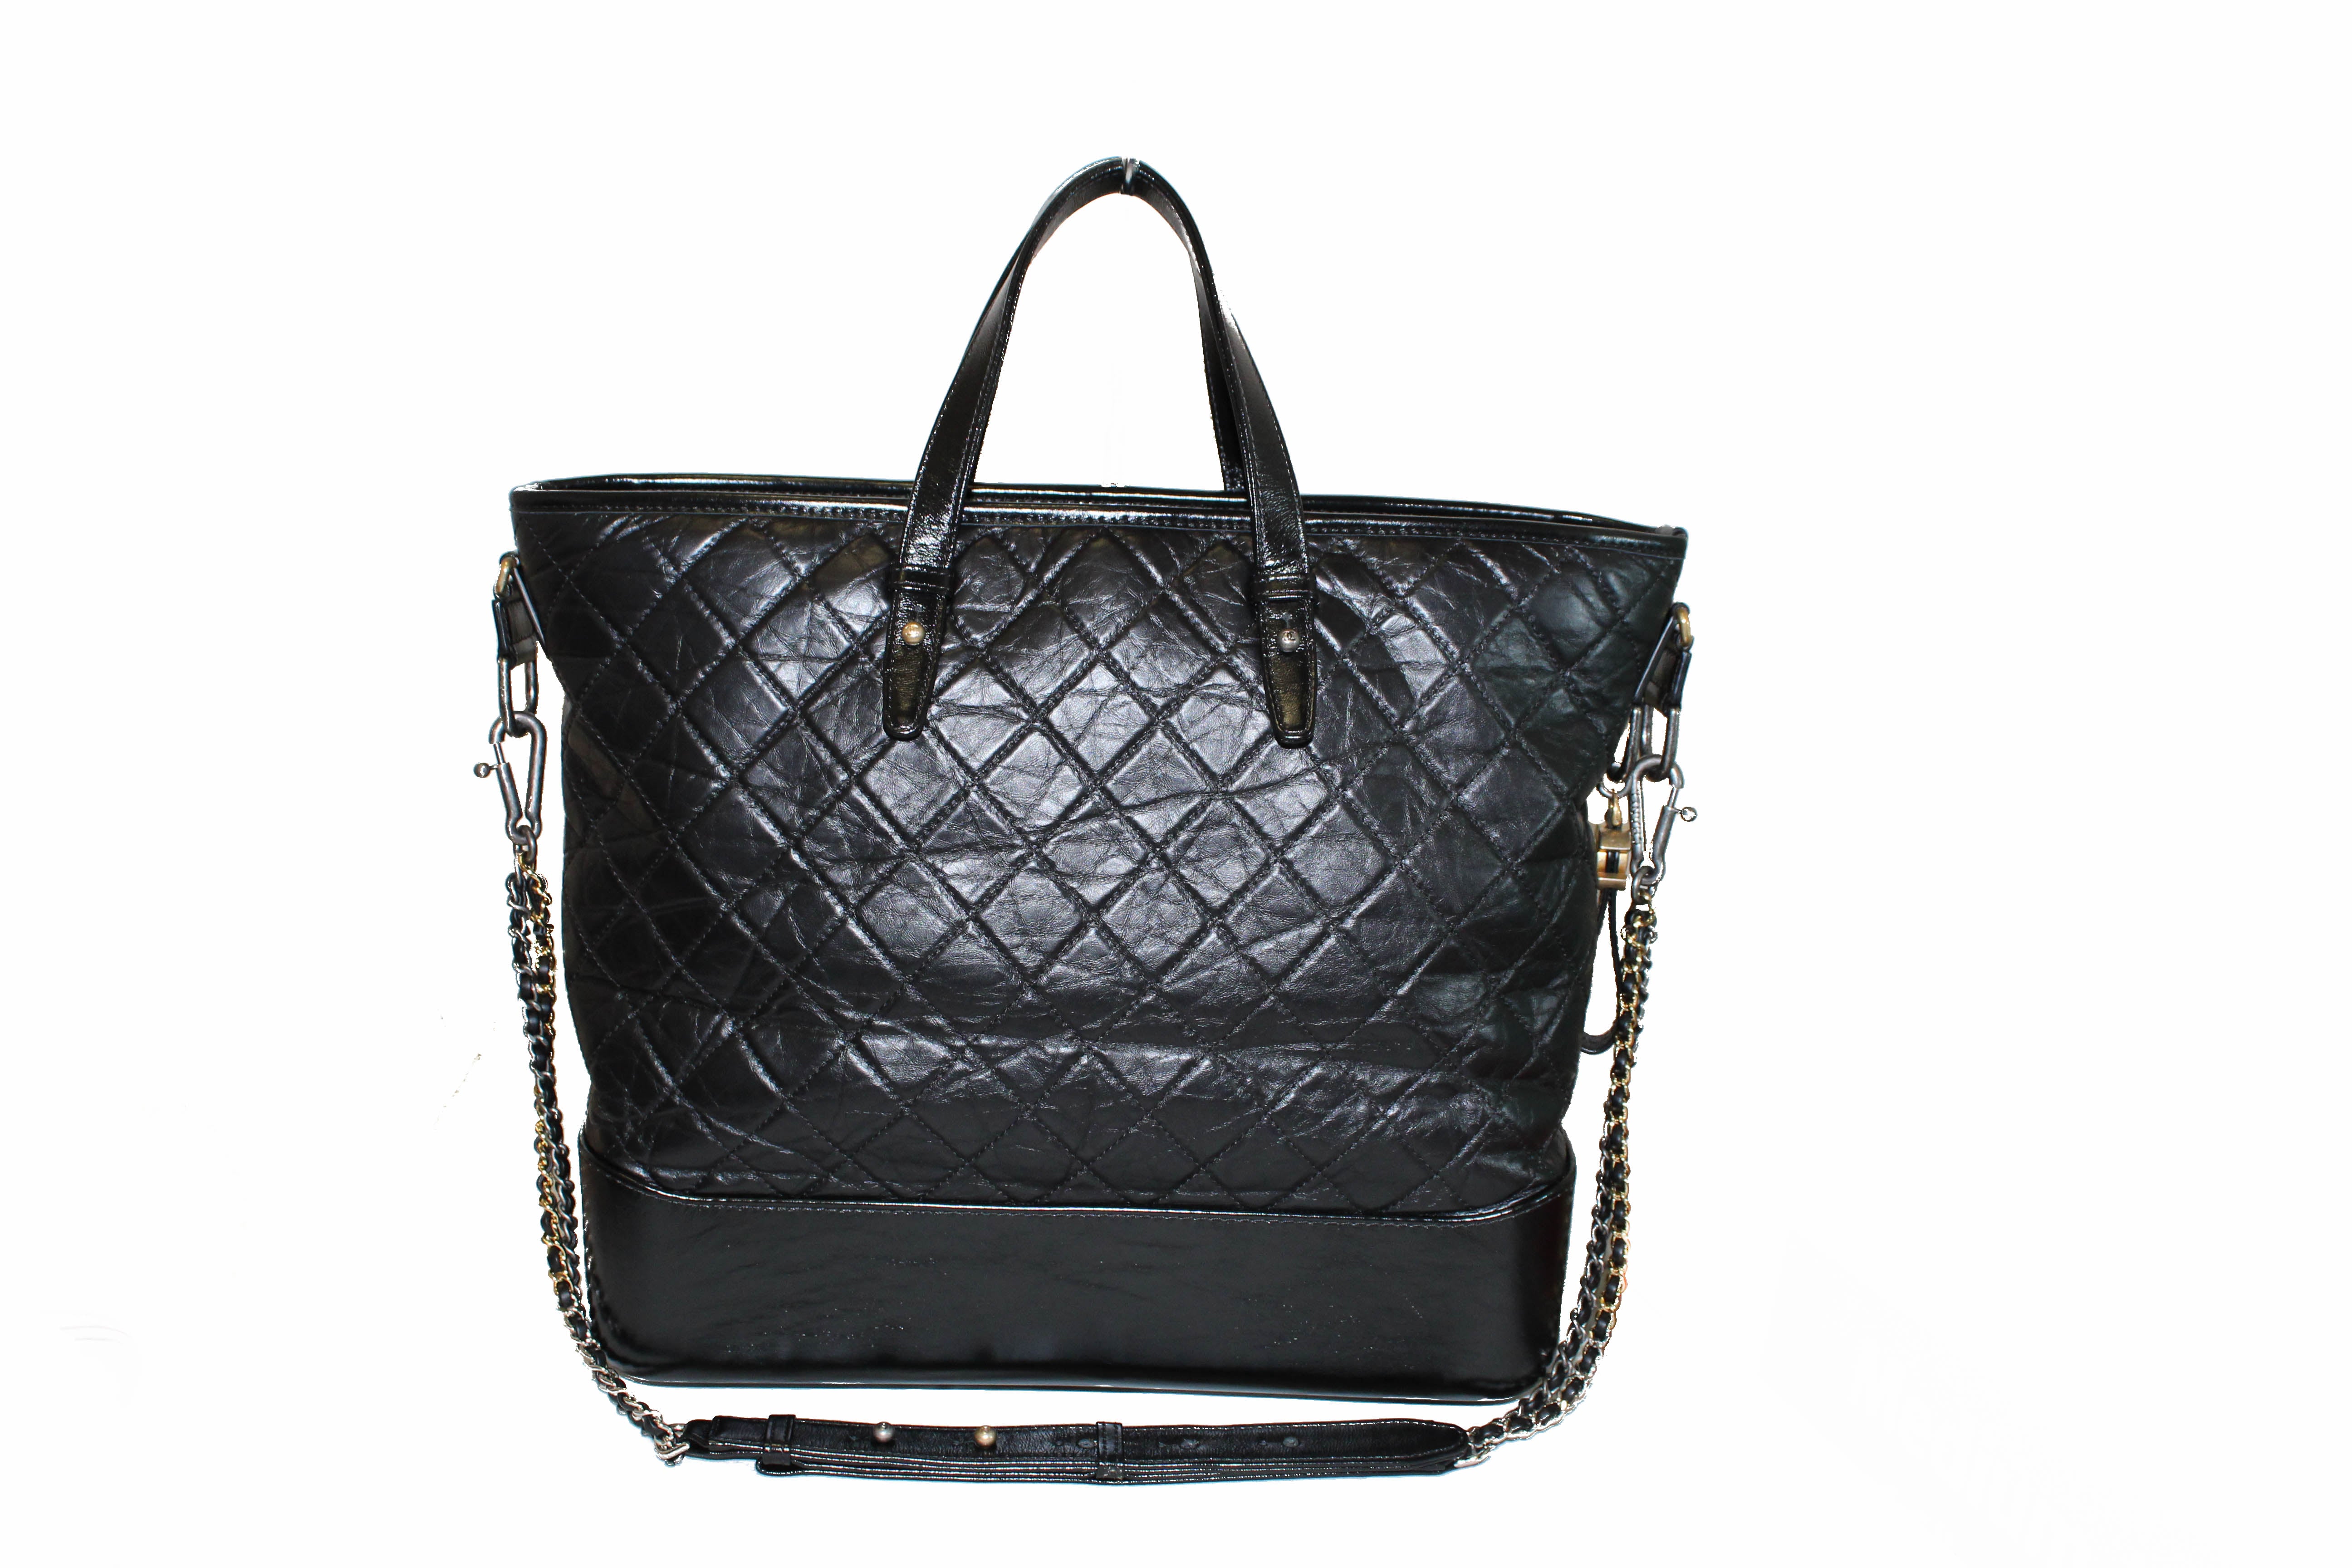 Chanel Gabrielle Large Quilted Calfskin Leather Shopping Tote Bag Black